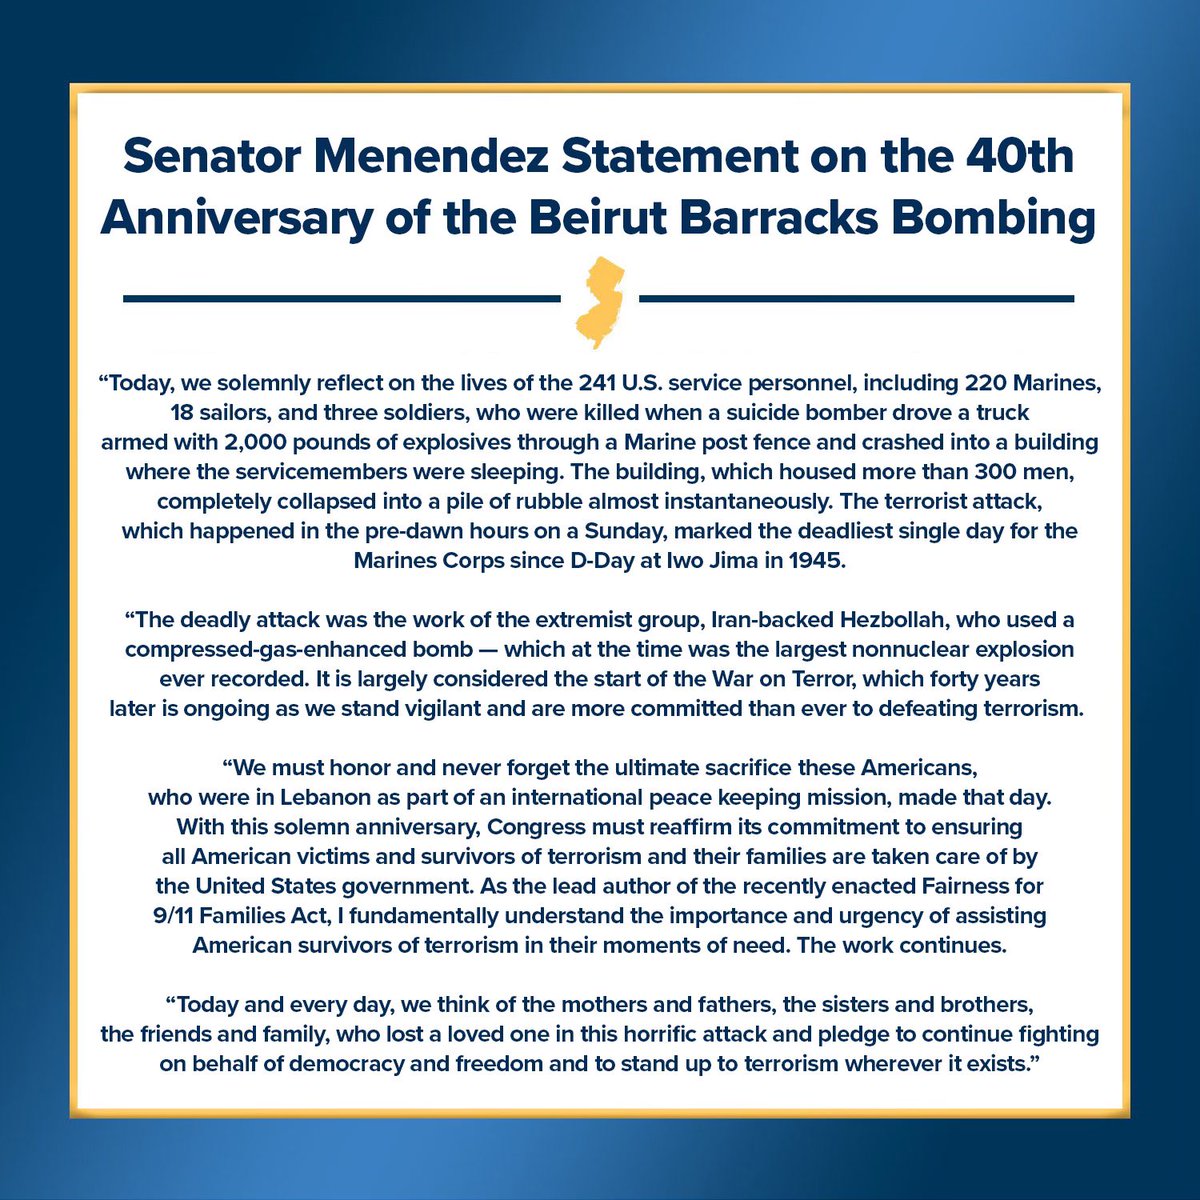 Today, we solemnly reflect on the 241 U.S. service personnel who were killed when a suicide bomber drove a truck armed with 2,000 pounds of explosives through a Marine post fence and crashed into a building. My statement on the 40th anniversary of the Beirut Barracks Bombing: